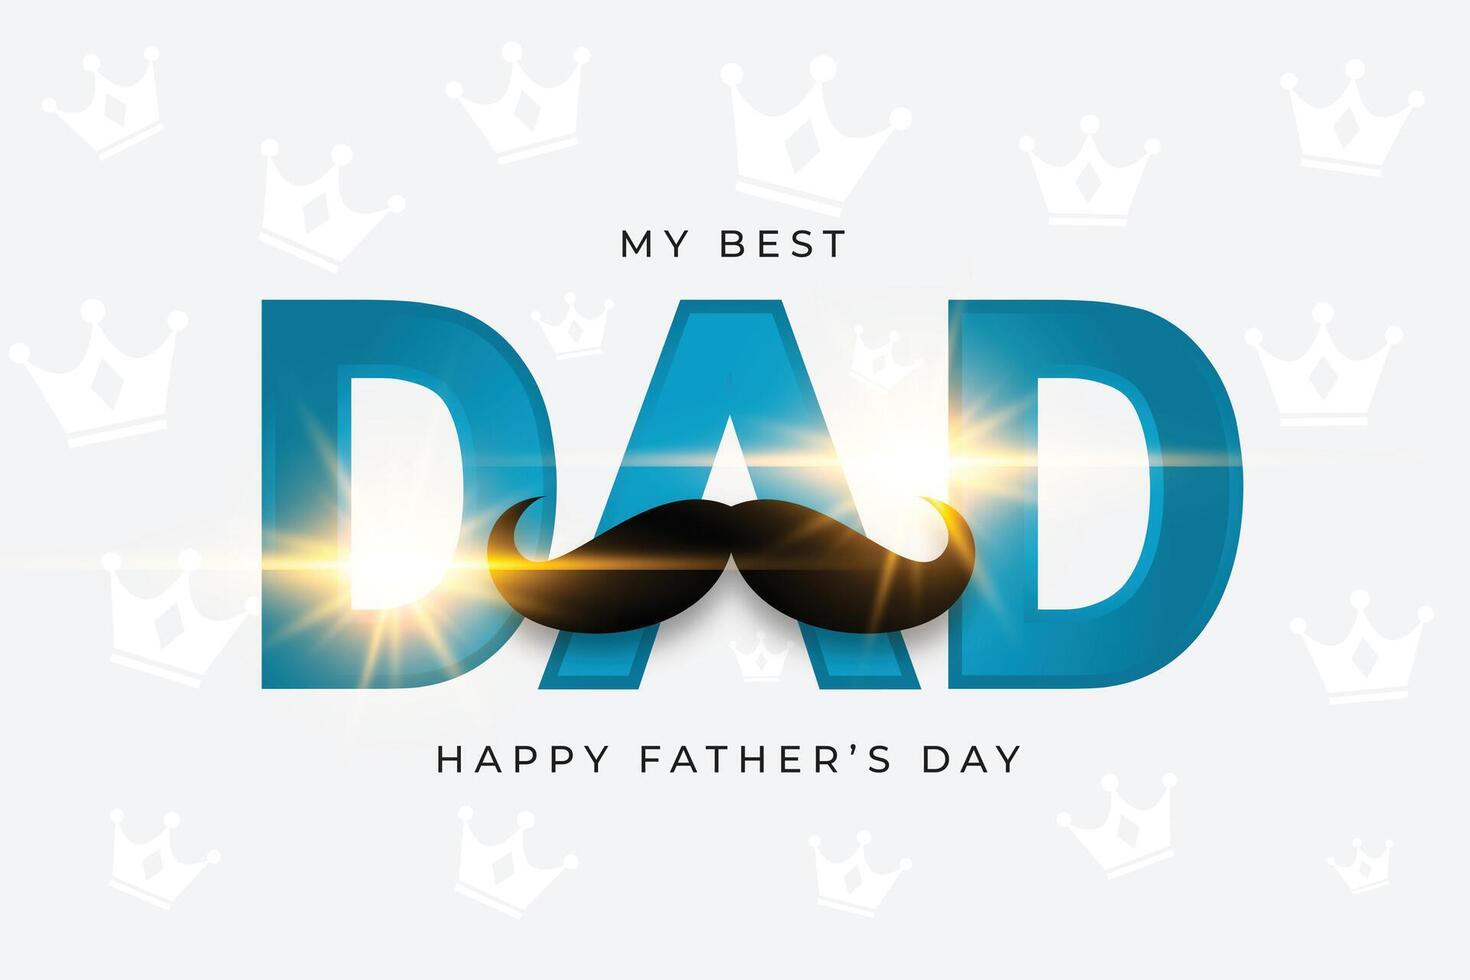 happy fathers day shiny card design vector